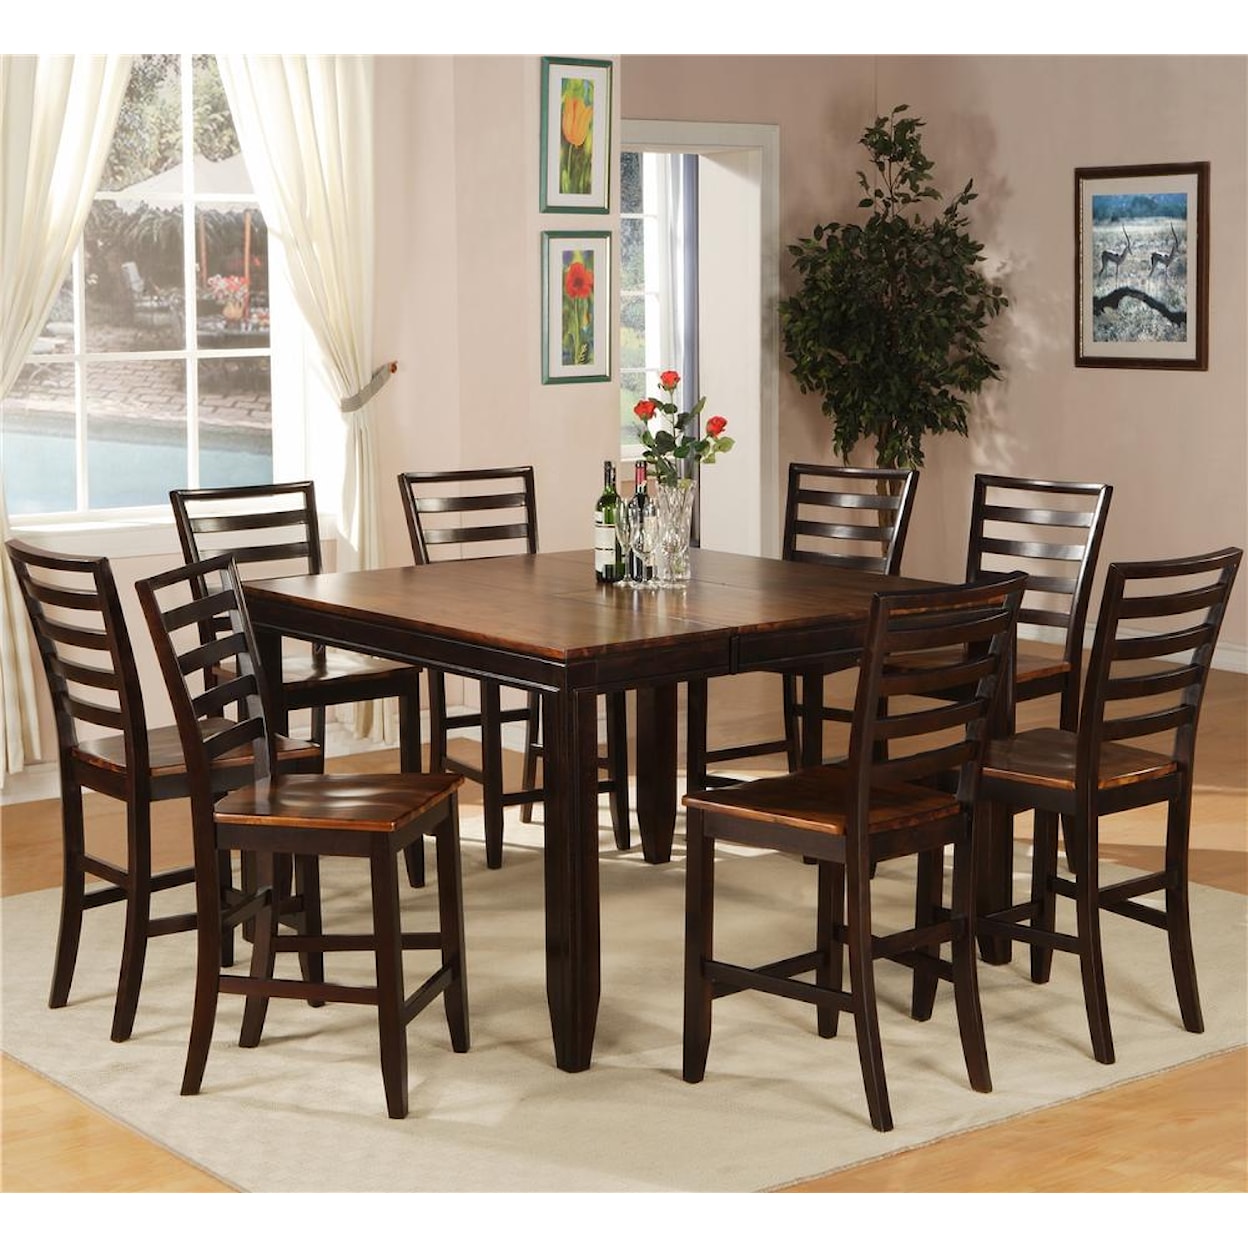 Holland House Adaptable Dining 9 Piece Casual Dining Set